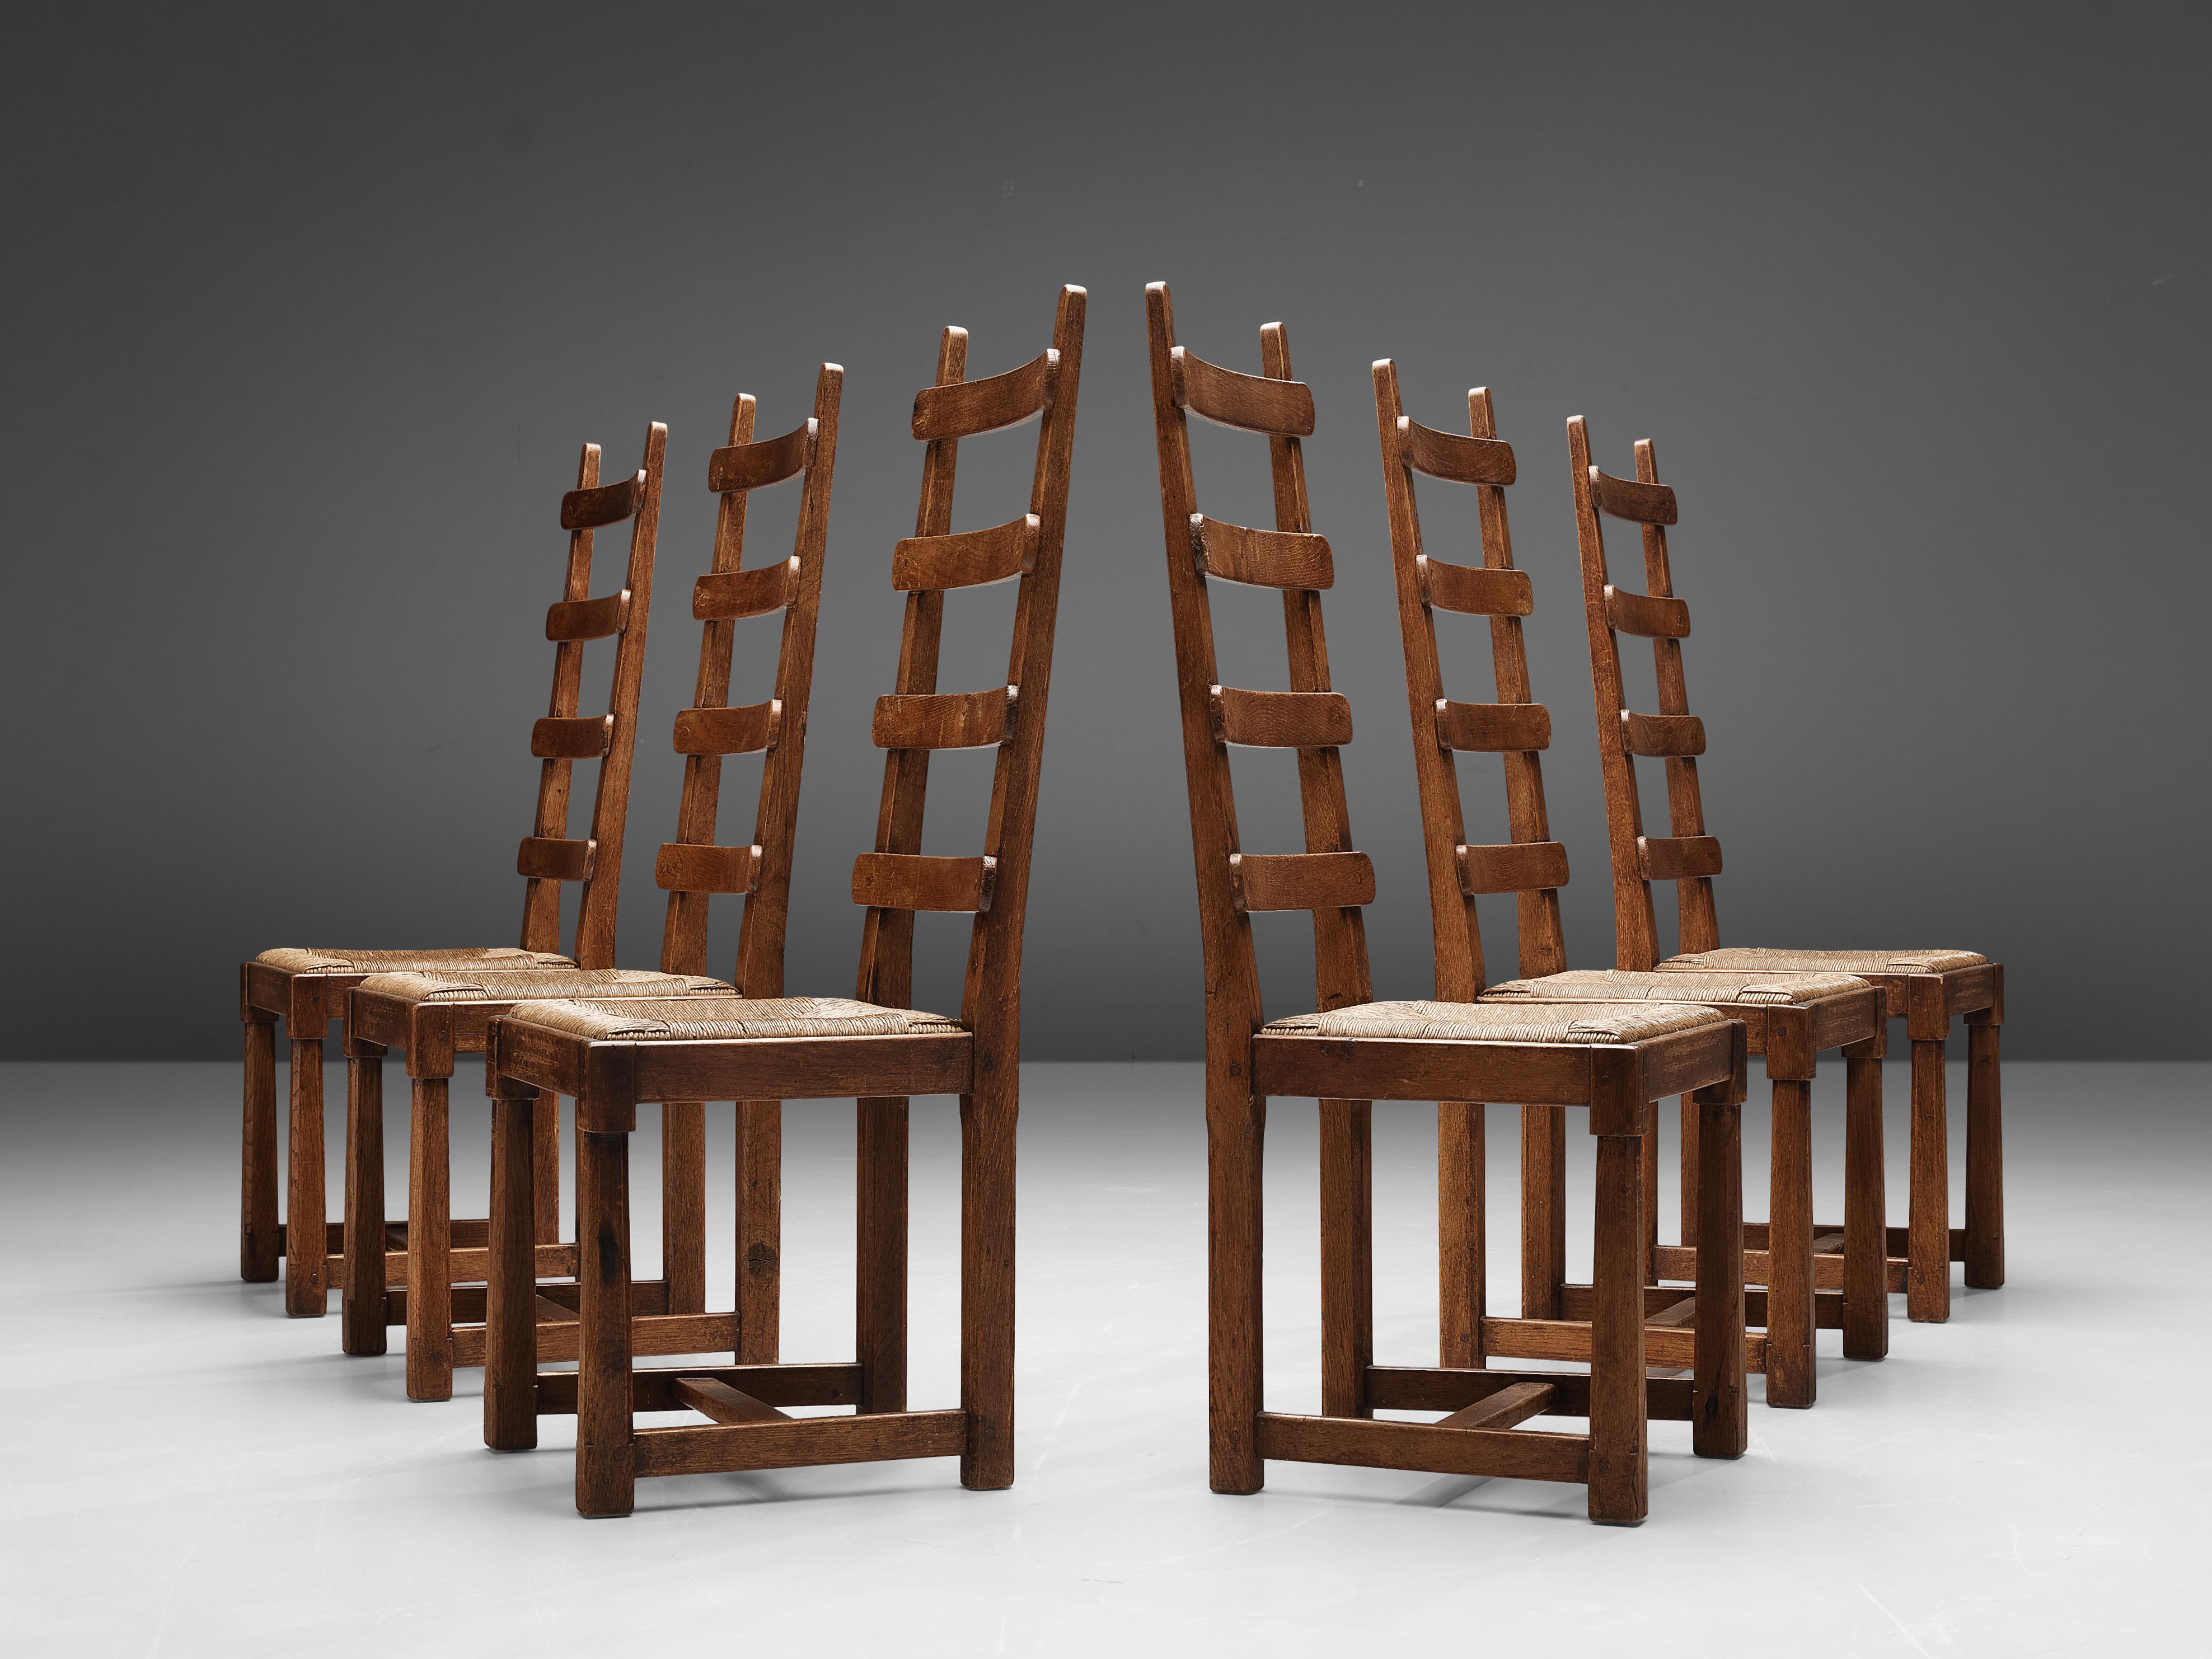 Set of six dining chairs, rush, oak, France, 1950s

French dining chairs in oak and rush seats. Characteristic about these chairs is their impressive high backrest structured with four horizontal slats. The front legs are carved in a sculptural